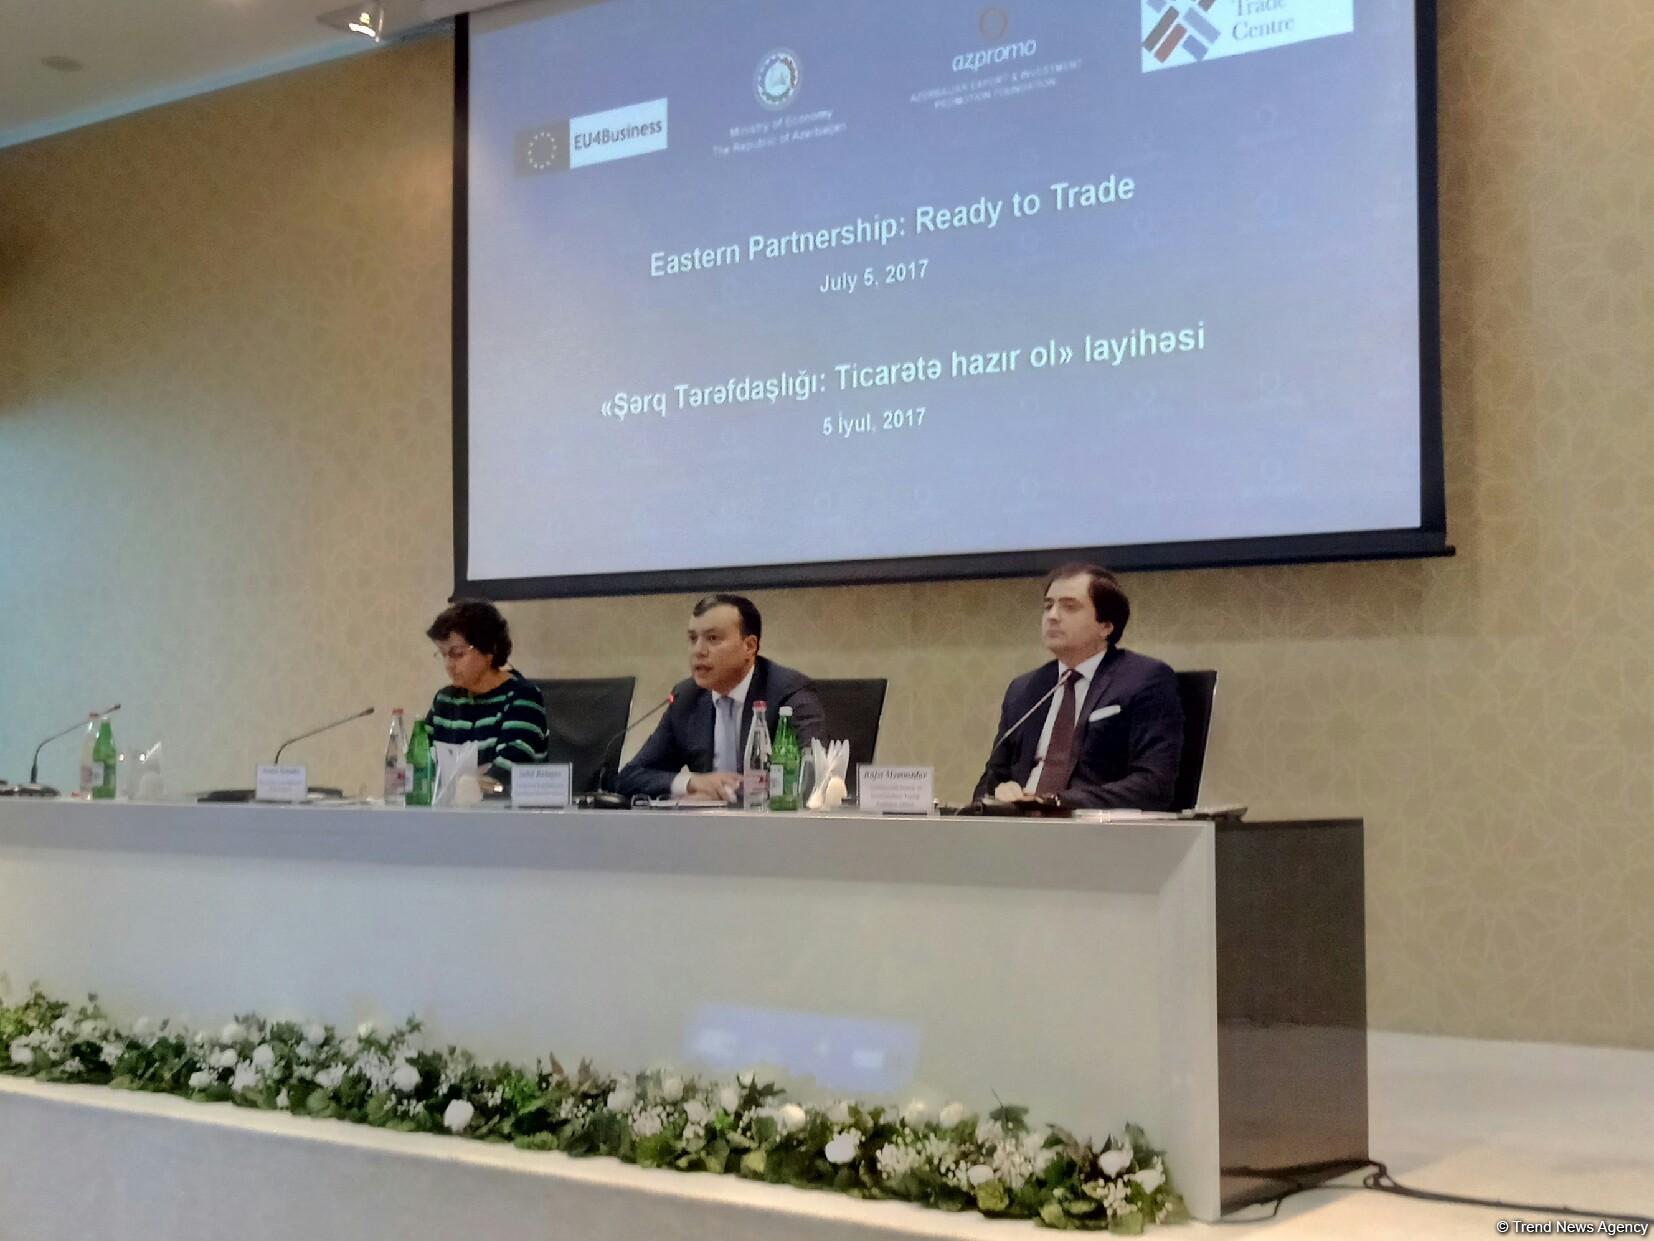 “About 80% of Azerbaijan’s GDP accounts for private sector”